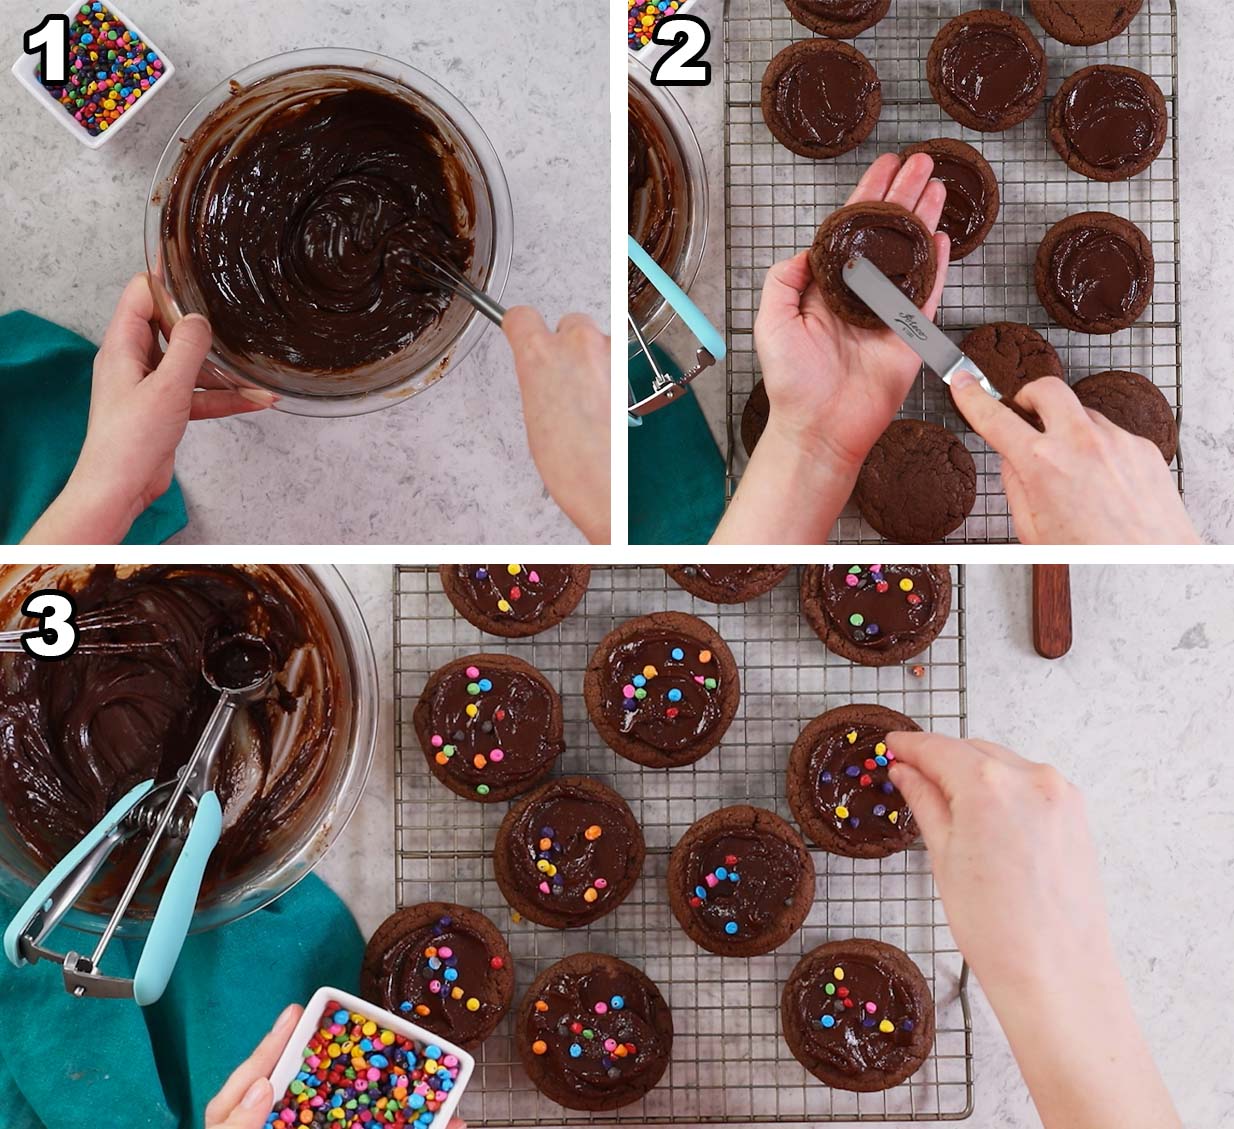 Three photos showing an overhead view of fudge frosting being prepared, spread over cookies, and topped with colorful candy pieces.